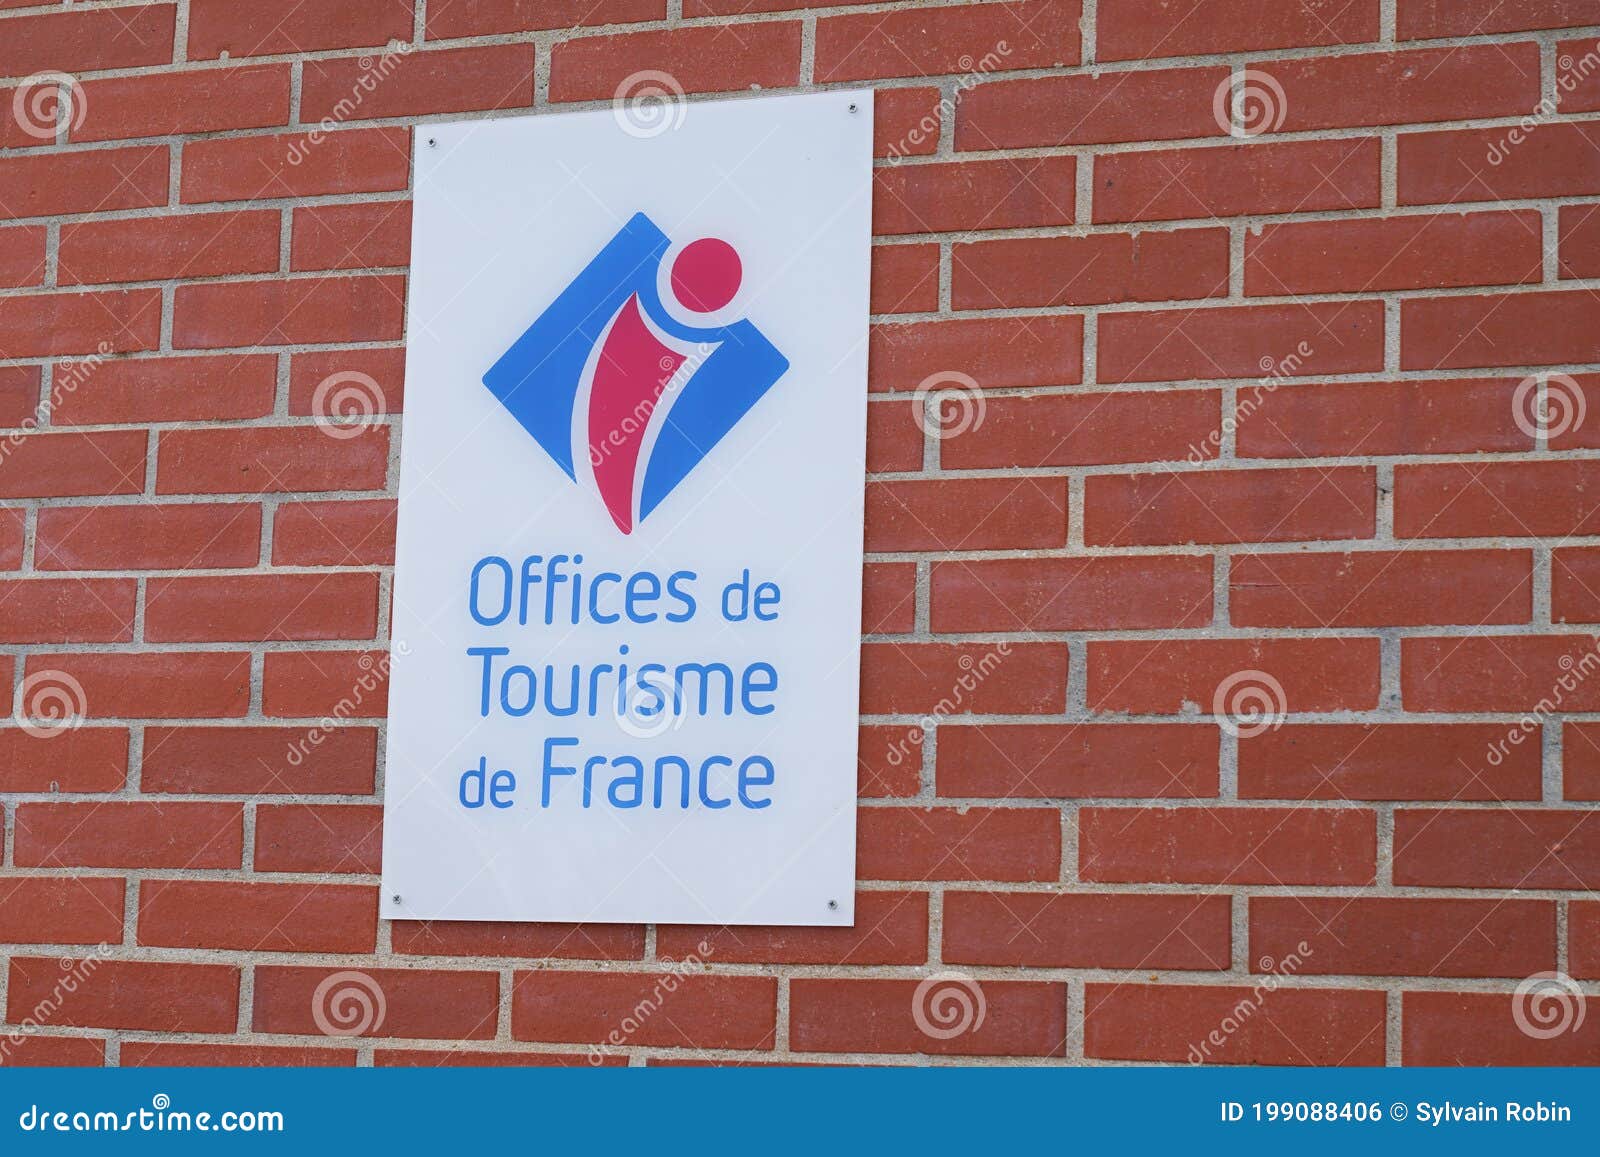 office of tourism france